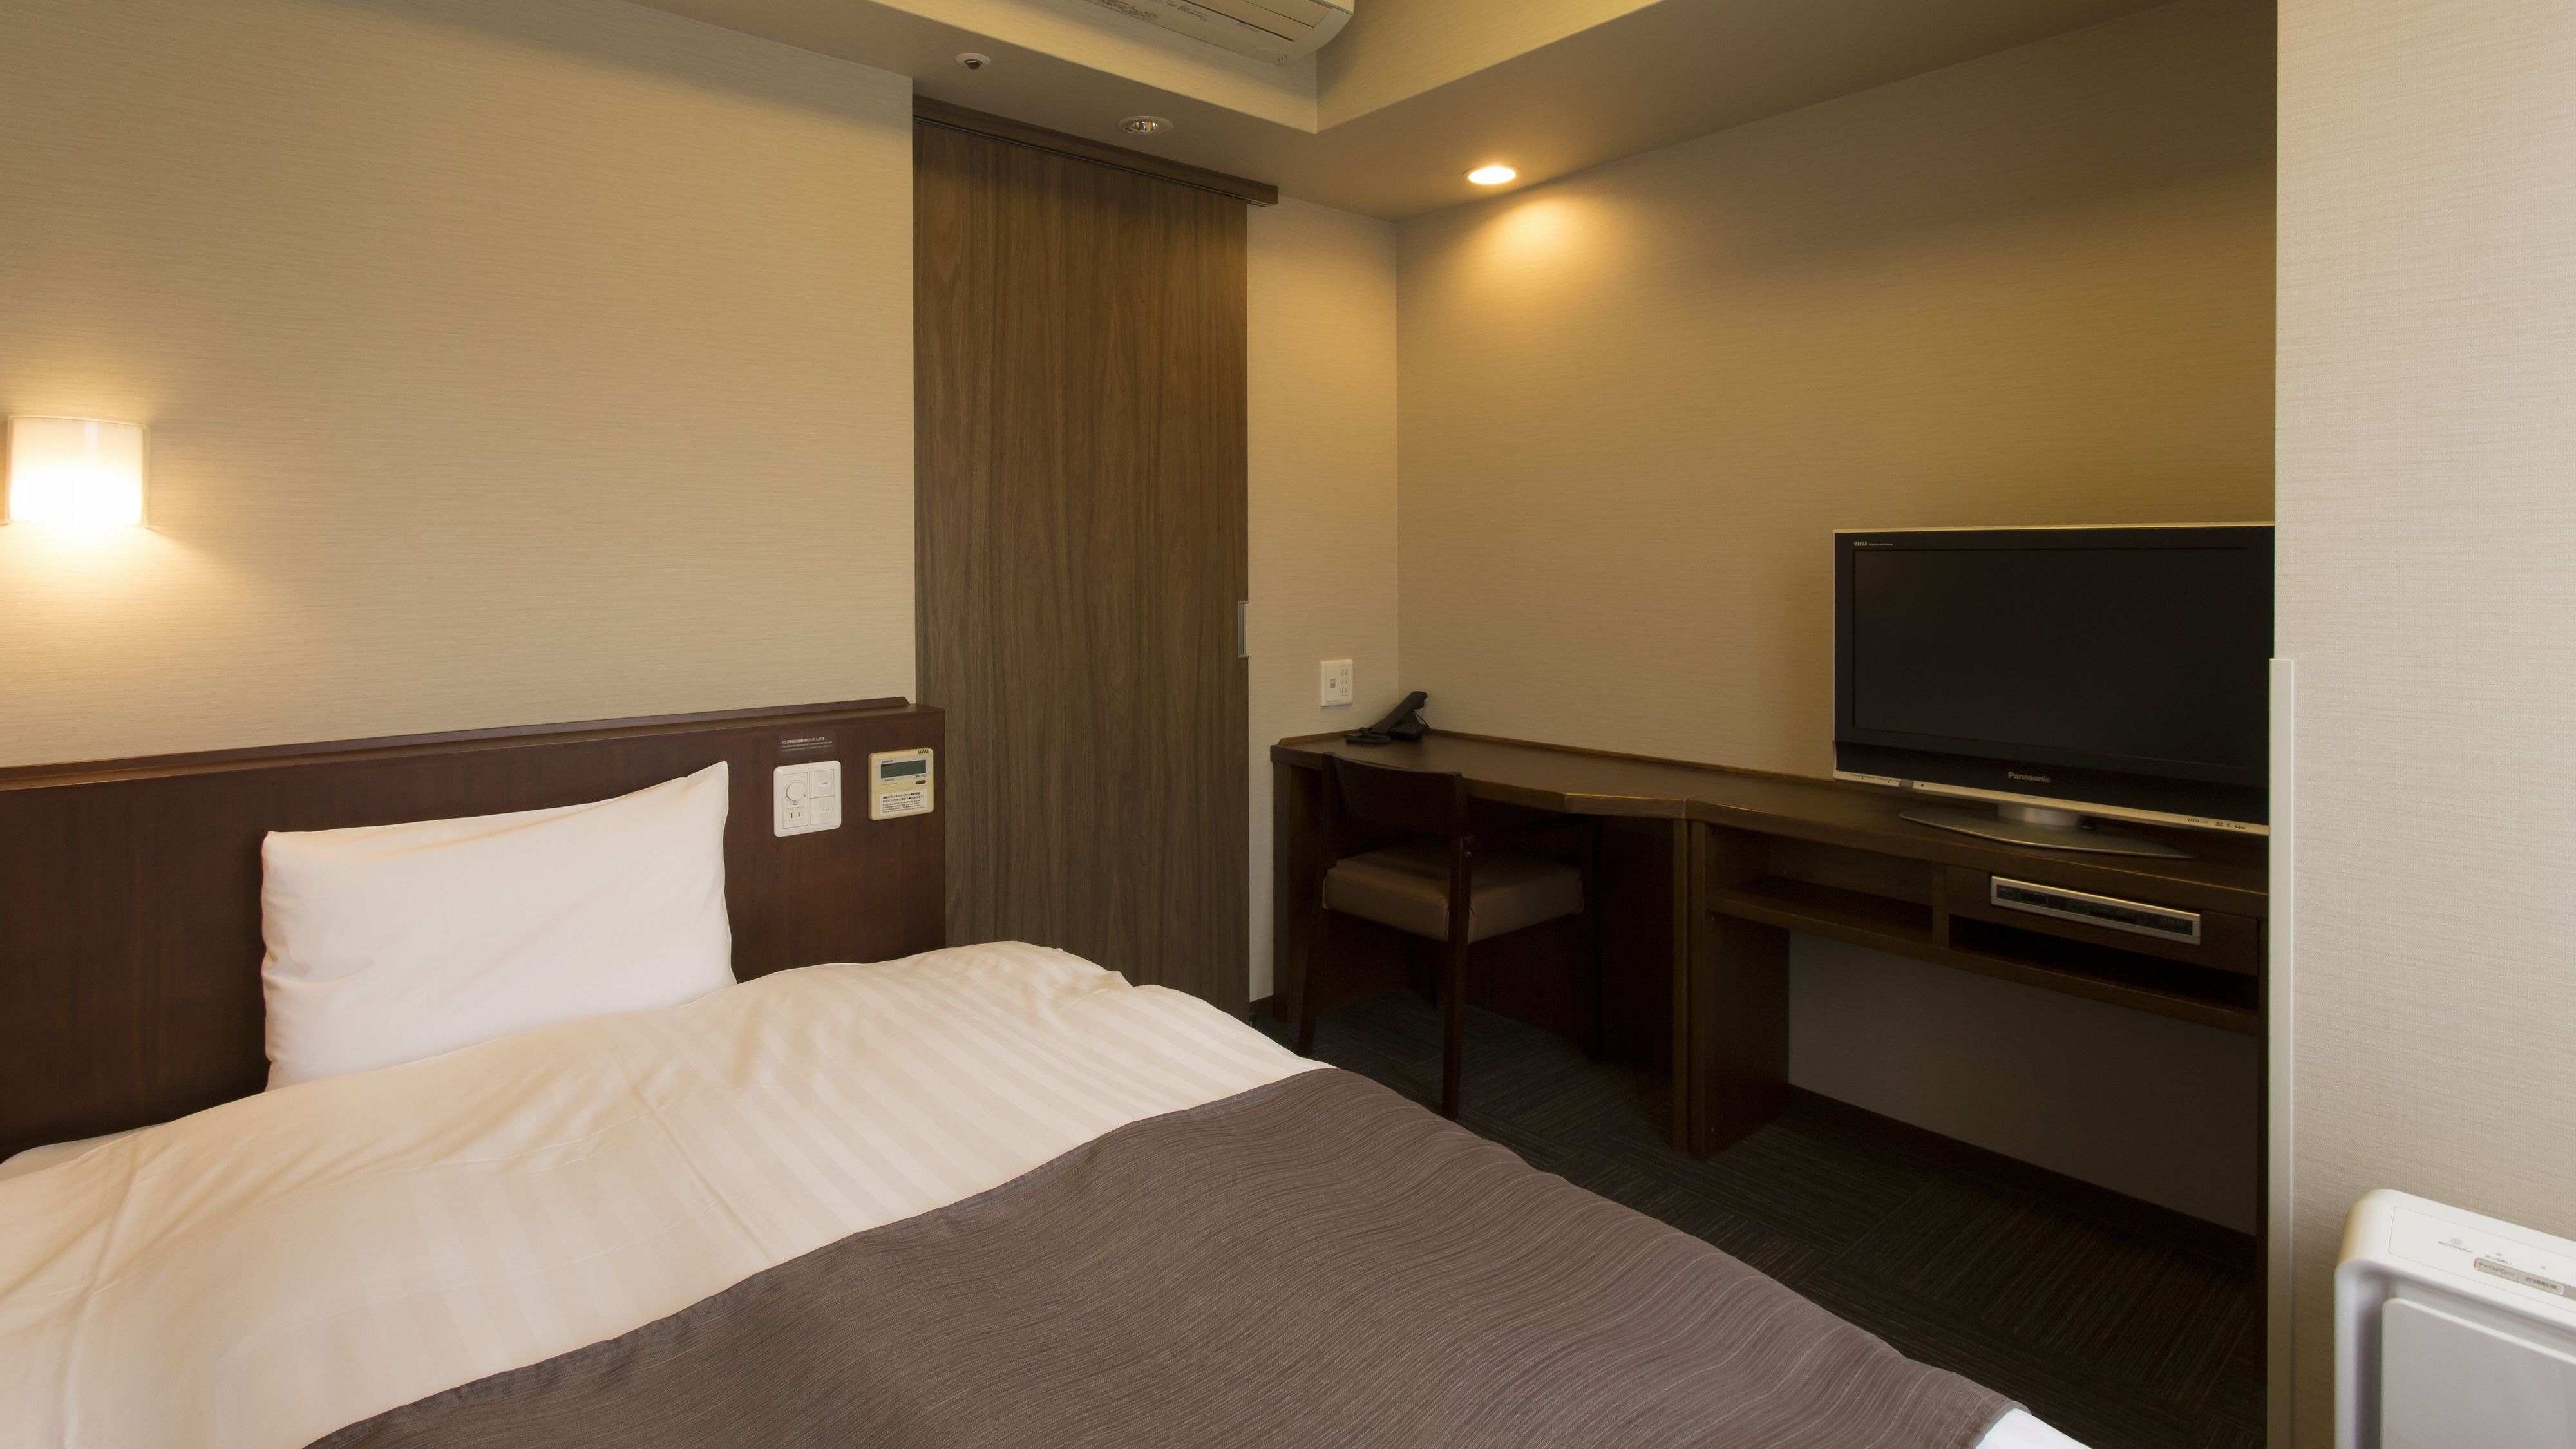 [Non-smoking / Smoking] Semi-double room (1200 & times; 1950) 14.6㎡ ◇ Simmons bed complete